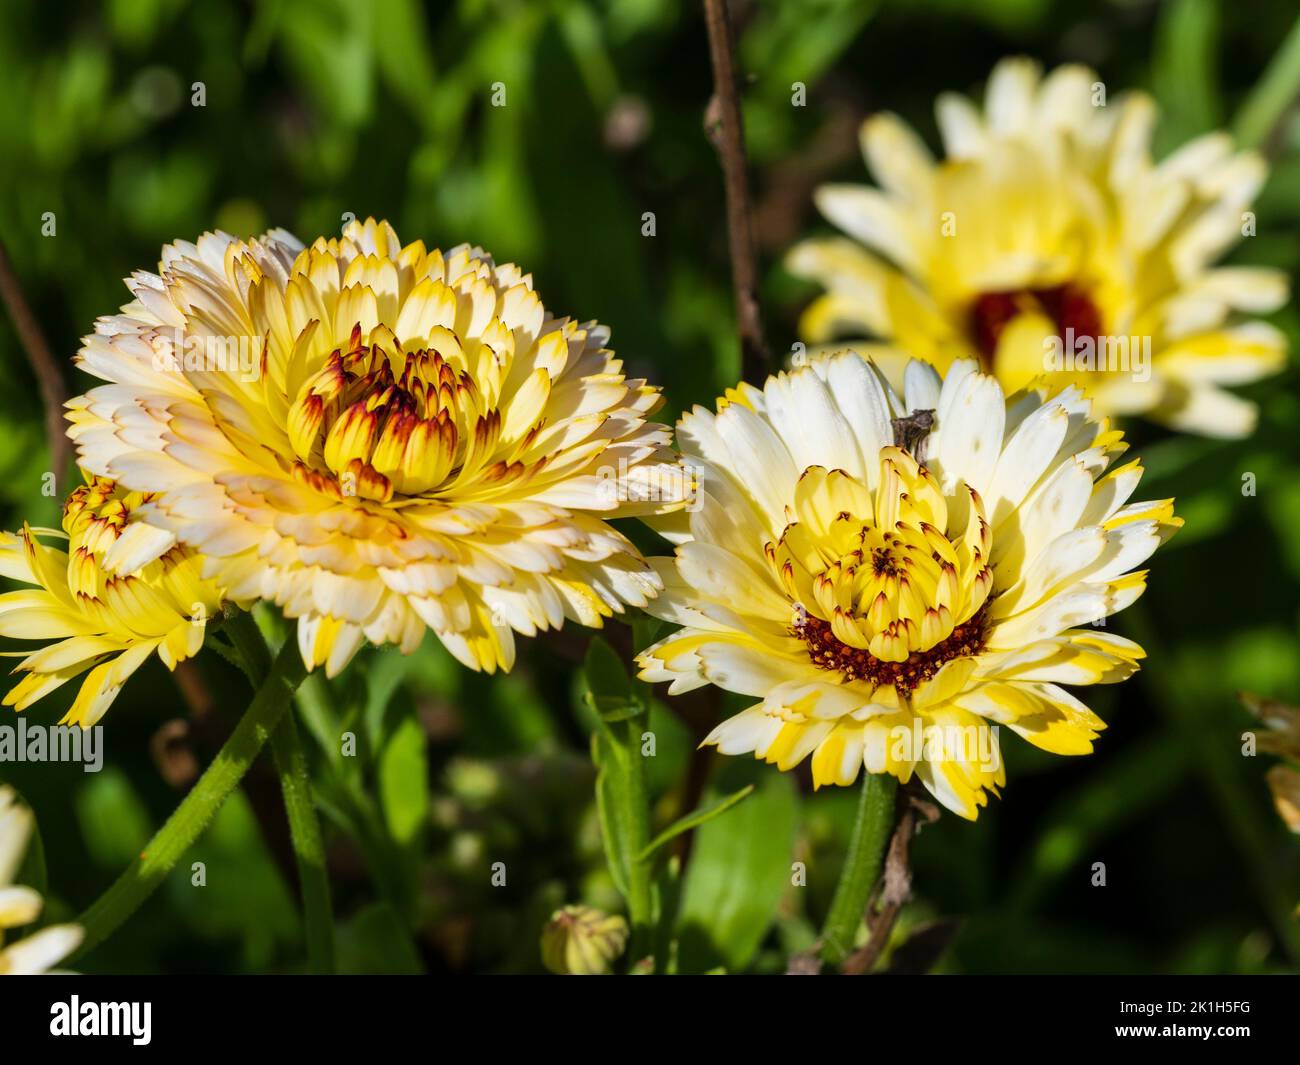 Yellow and white double flowers of the hardy annual pot marigold, Calendula officinalis 'Snow Princess' Stock Photo